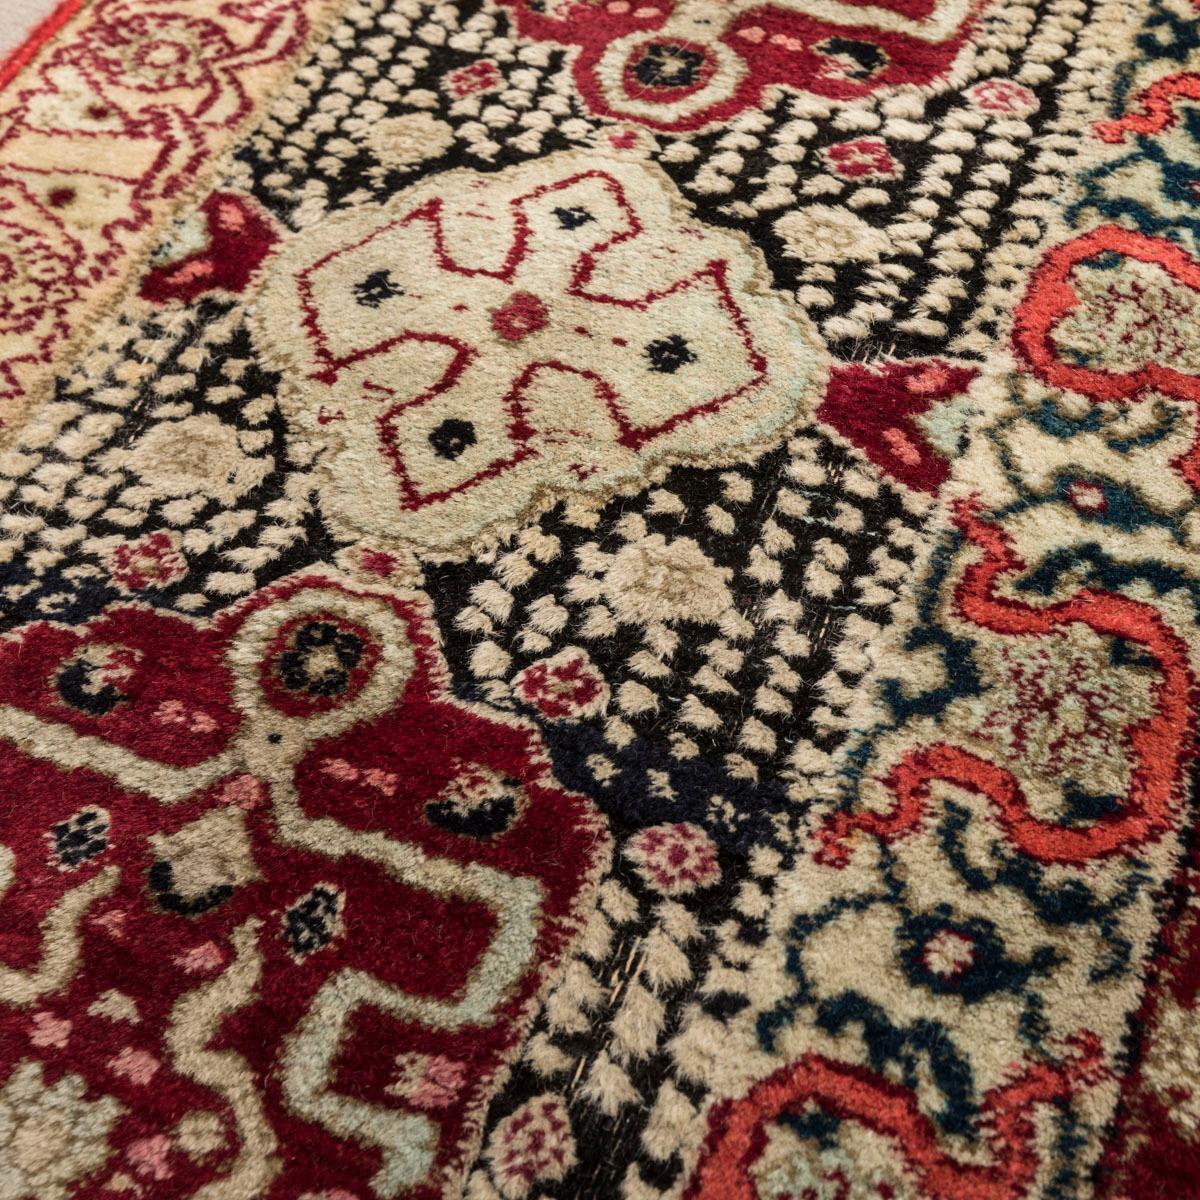 Antique Agra India Wool Rug. Circa. 1930. 3.50 x 2.70 m. For Sale 4